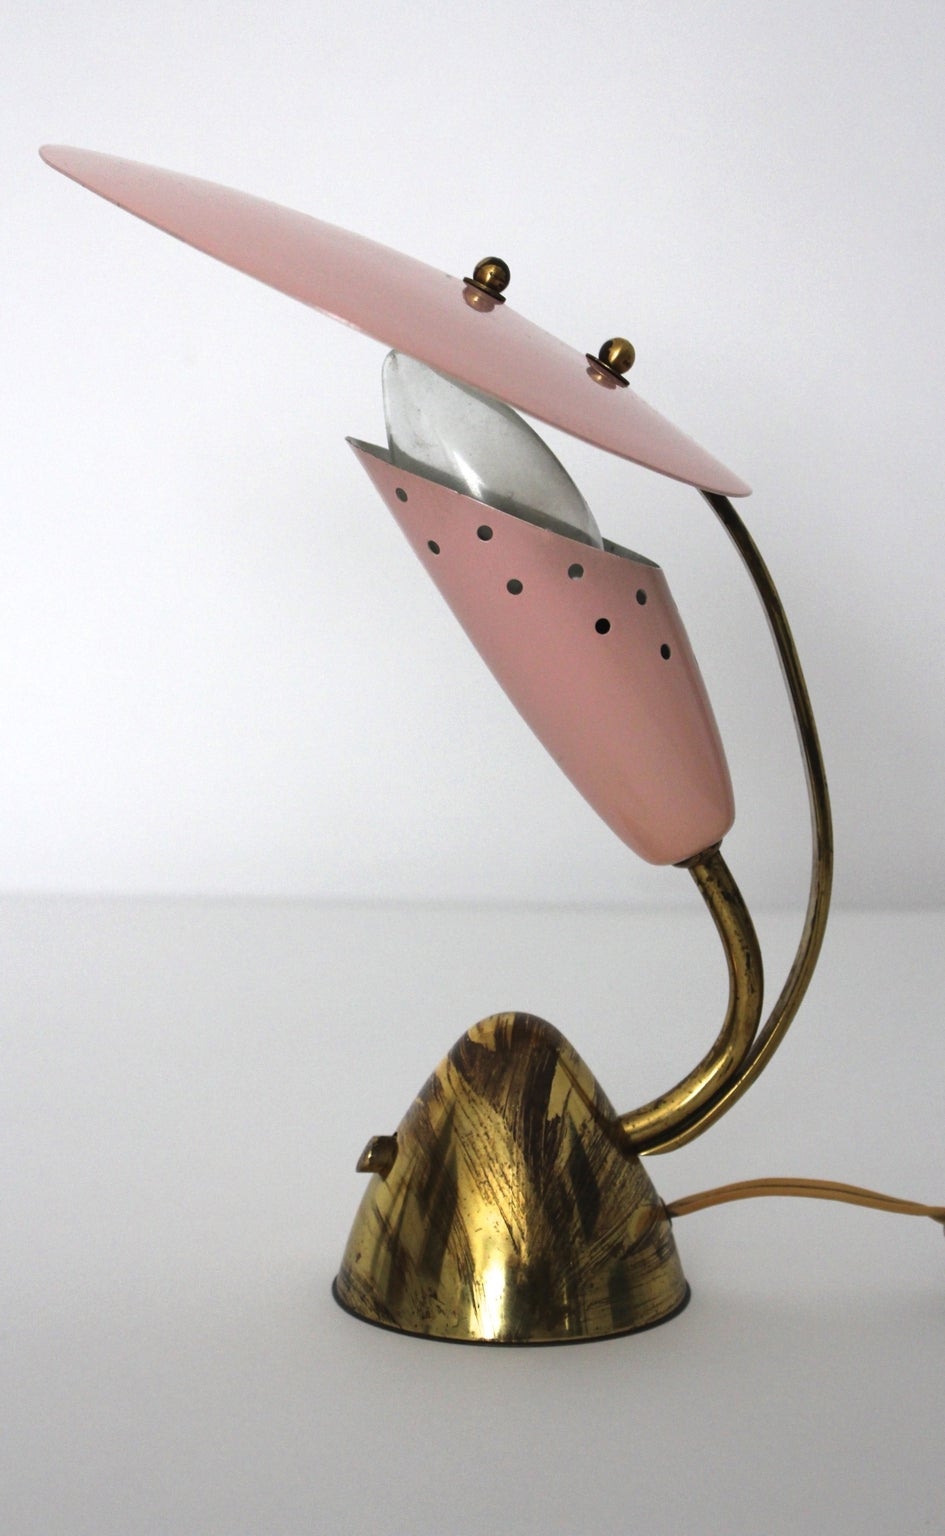 Md century modern pink brass vintage table lamp, which was designed and manufactured Italy 1950s.
The charming and cute lamp is made of brass, pink and white enameled metal.

Also the table lamp shows a removable diffuser. On and off switch, one